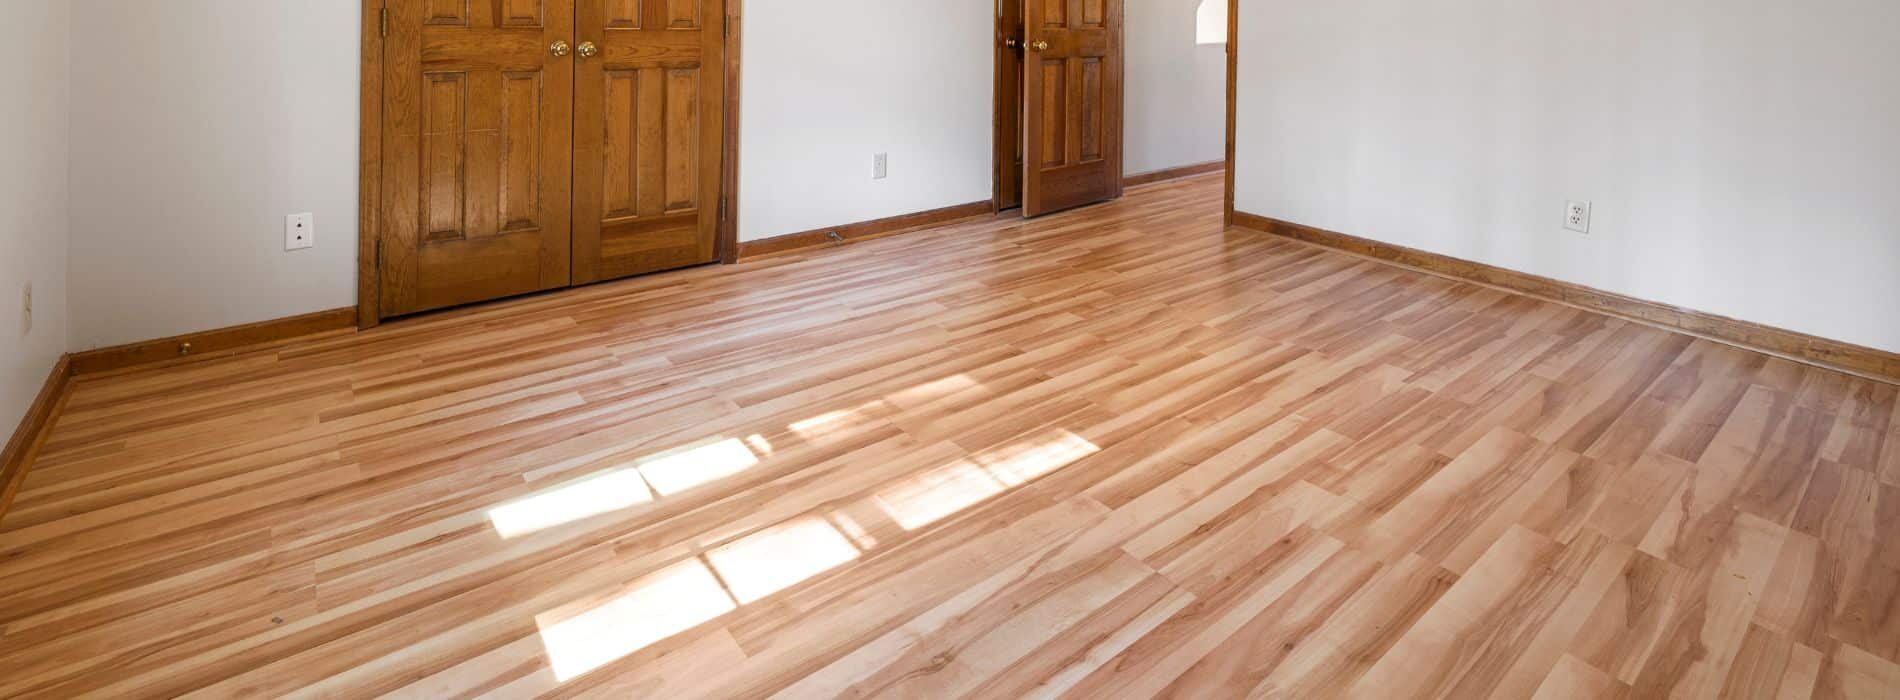 Expertly restored 5 year old hardwood floor in Purley,CR8. Mr Sander® used Bona 2K Frost whitewashing and Traffic HD 15% sheen matte lacquer. Durable and stunning, this finish guarantees long-lasting beauty.